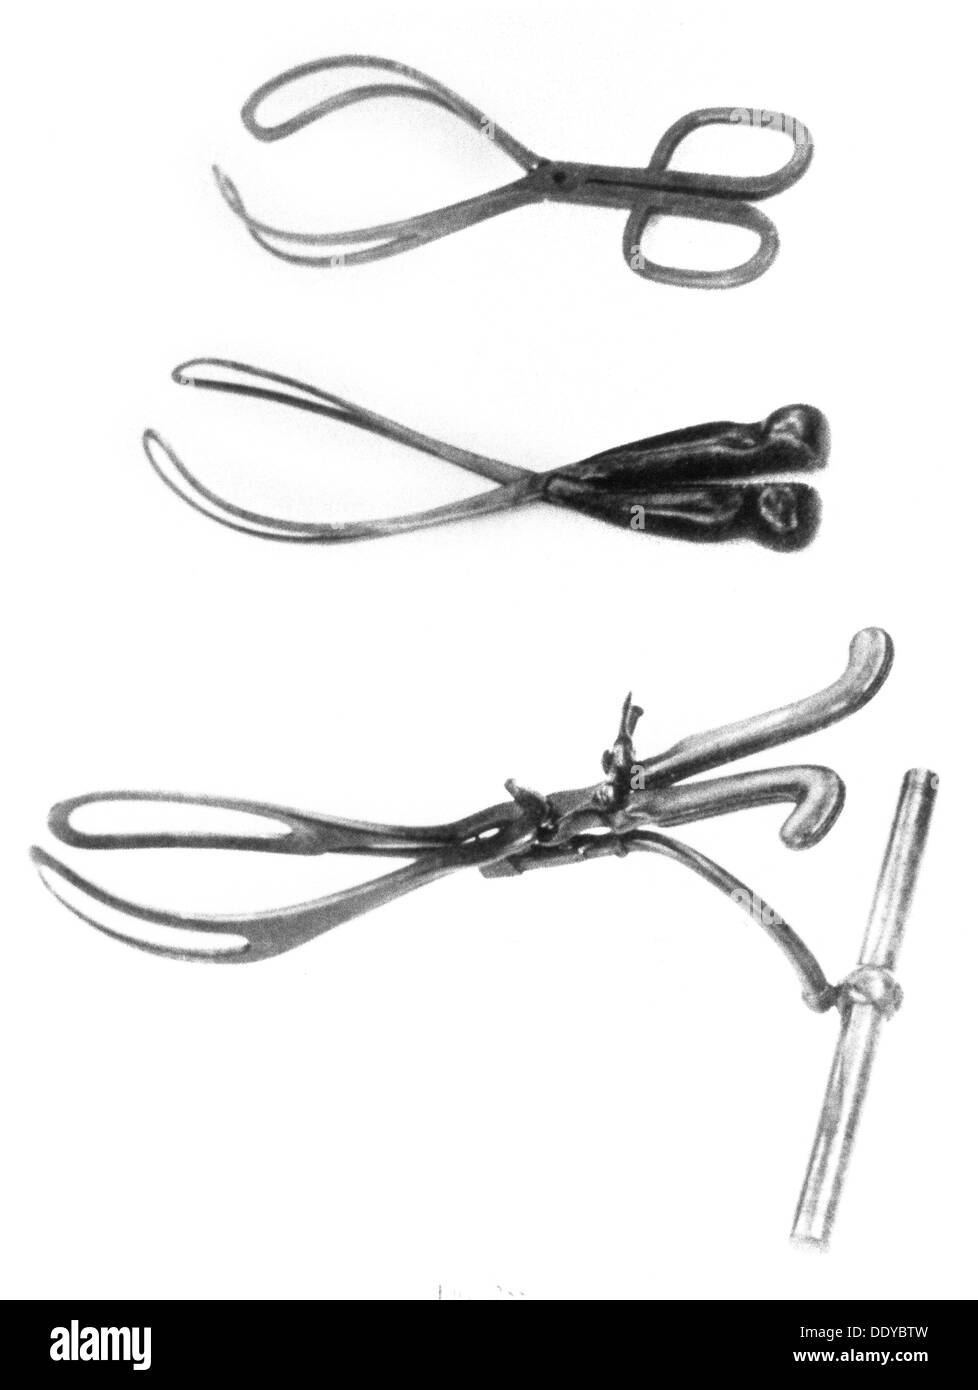 medicine, birth / gynecology, forceps, 20th century, 20th century, obstetrics, device, devices, instrument, instruments, aids and appliances, forceps, clipping, cut out, cut-out, cut-outs, birthing, bear, give birth, delivery, childbearing, childbirth, object, objects, stills, medicine, medicines, birth, births, gynecology, gynaecology, historic, historical, Additional-Rights-Clearences-Not Available Stock Photo